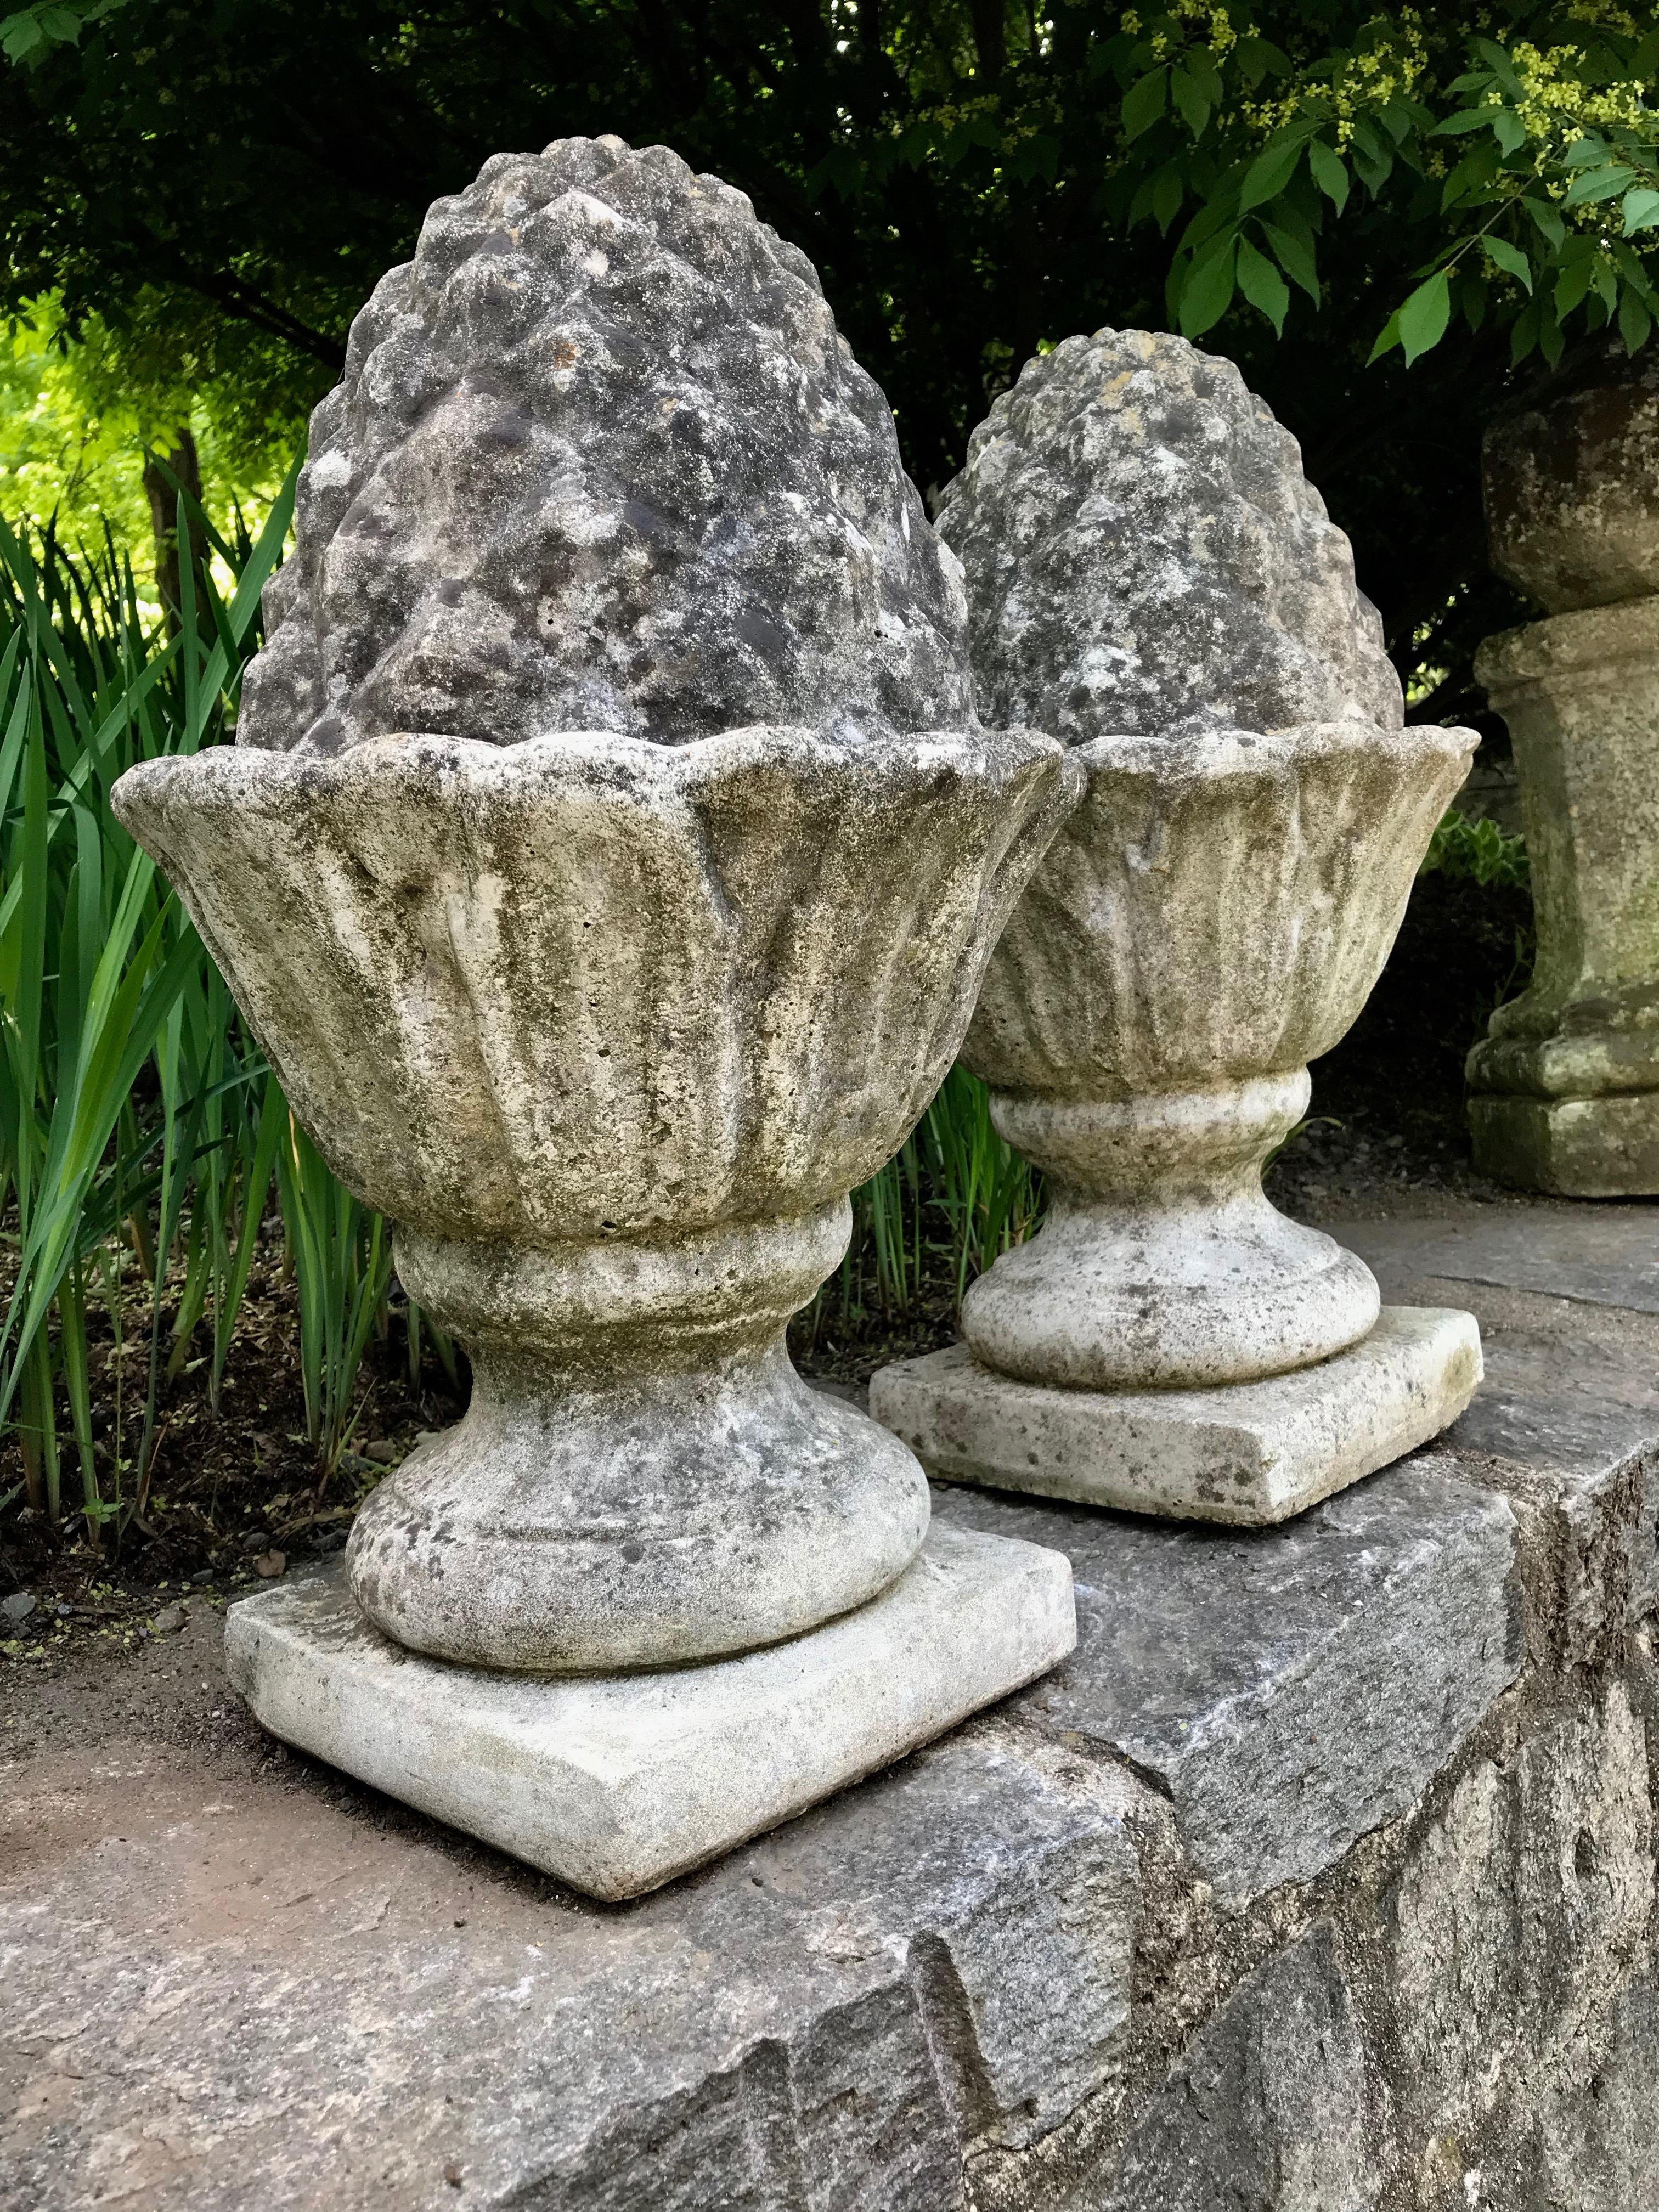 We’re always in search of pineapple or acorn finials and this pair is truly lovely. With a beautiful grey patina overall that is darker on the top, they would make an impressive statement atop a stone wall flanking the entrance to your garden, on a